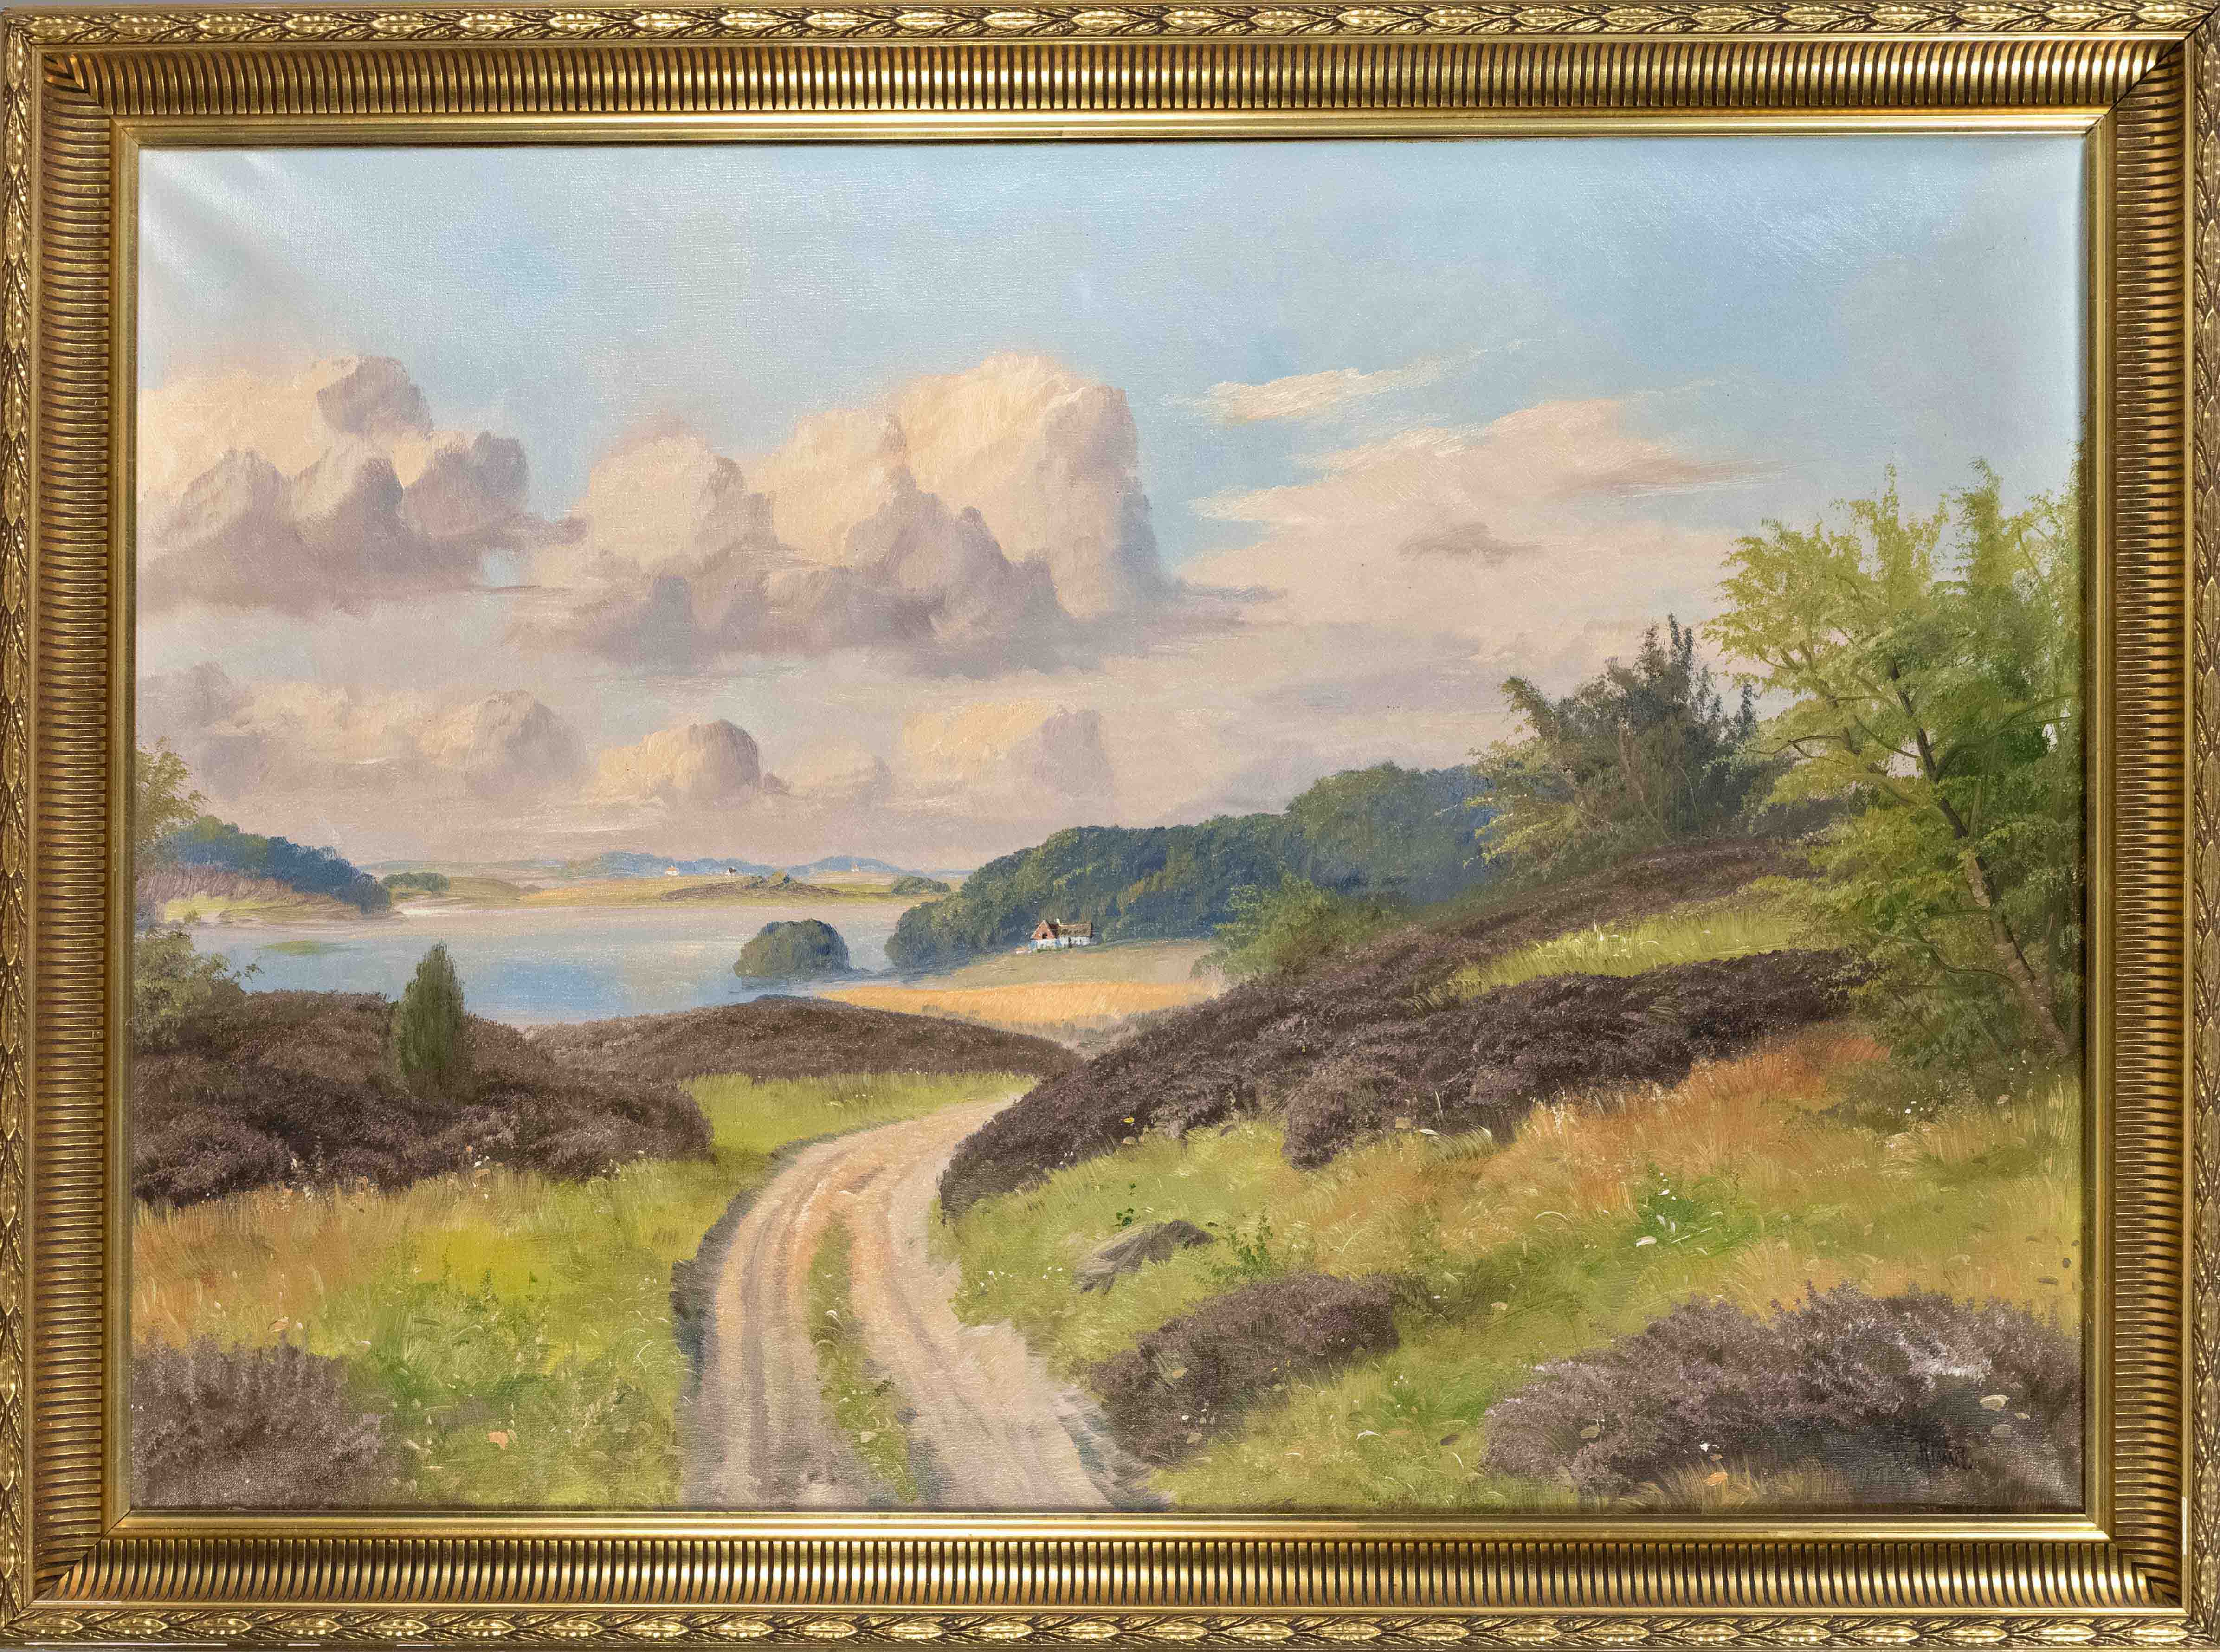 Borge Ruud (*1925), wide landscape, oil on canvas, signed lower right, 70 x 100 cm, framed 83 x